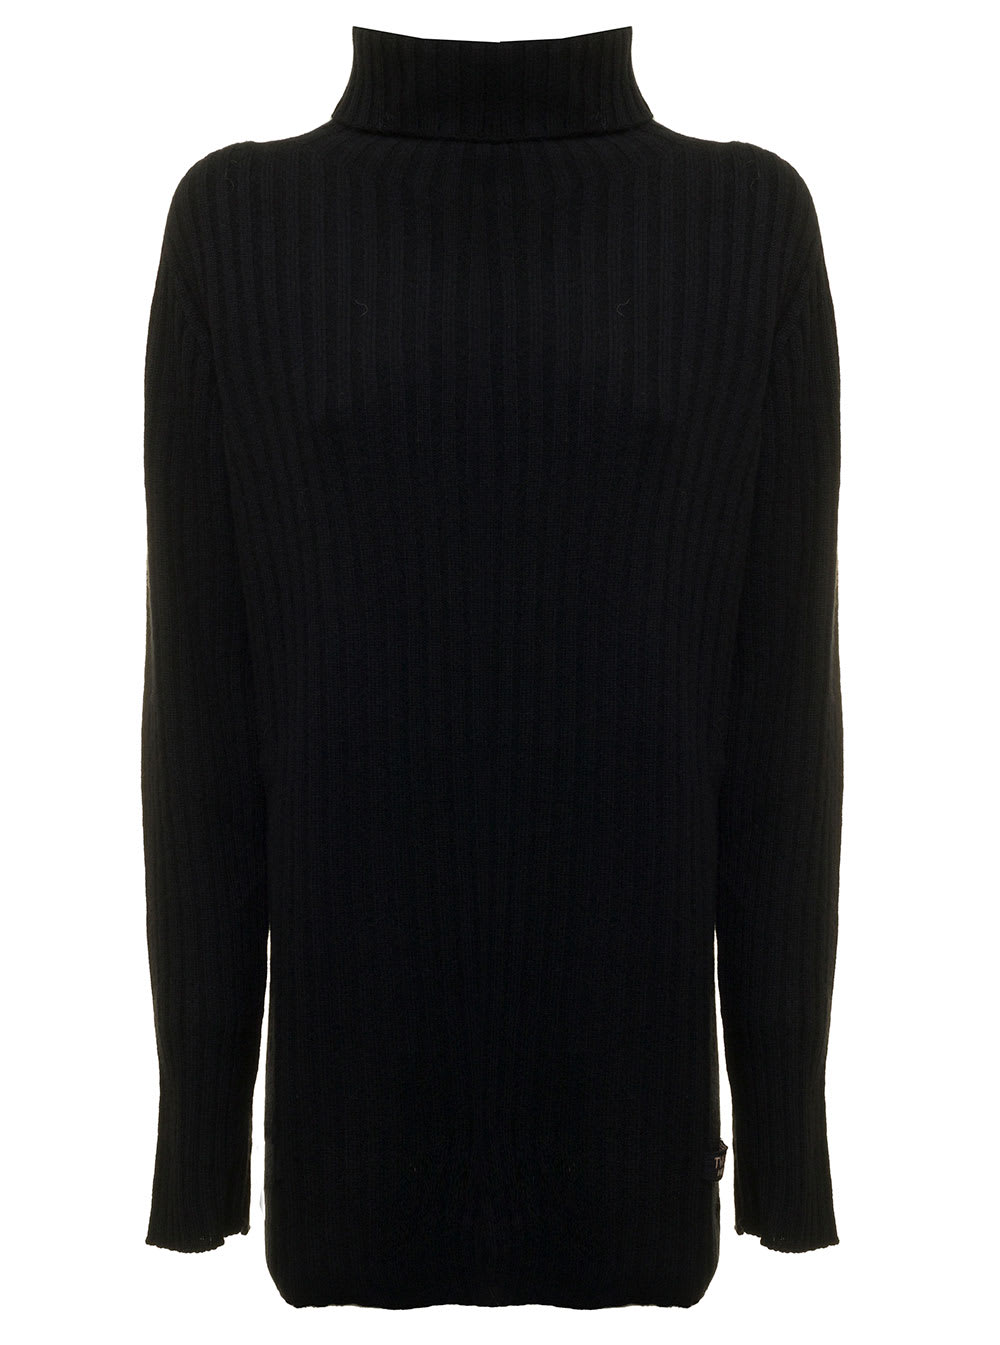 TwinSet Black Oversize Wool And Cashmere Sweater Twin Set Woman